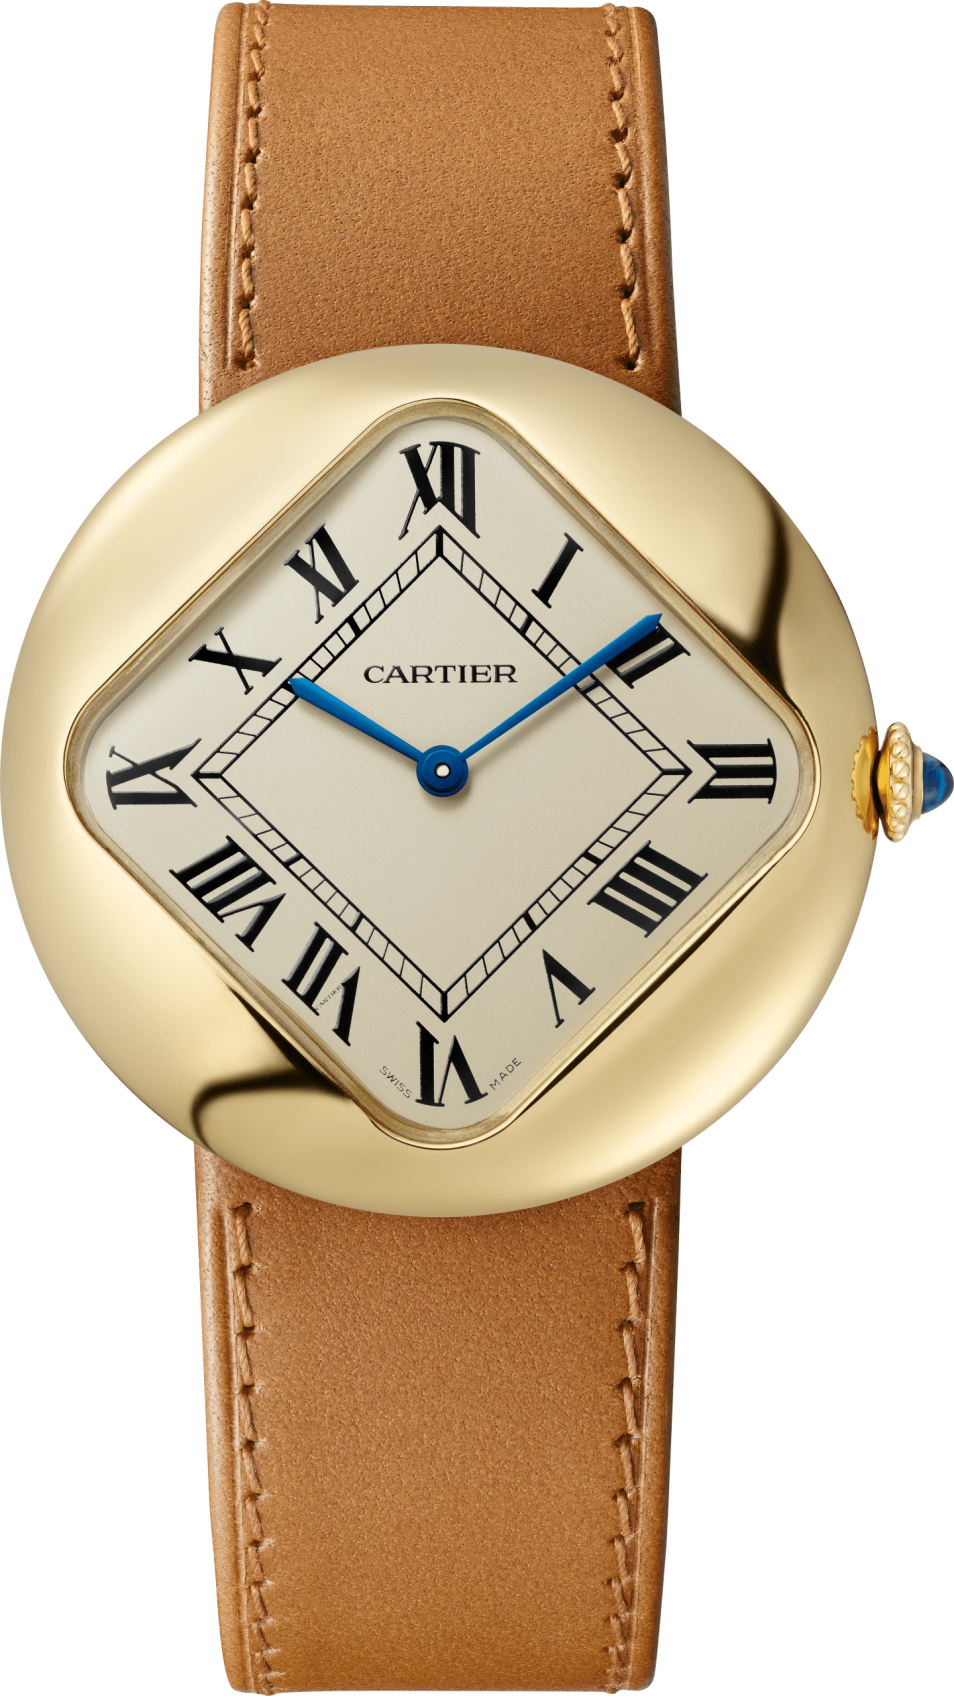 Taking a Second Look: The Perfect Replica Cartier Pebble